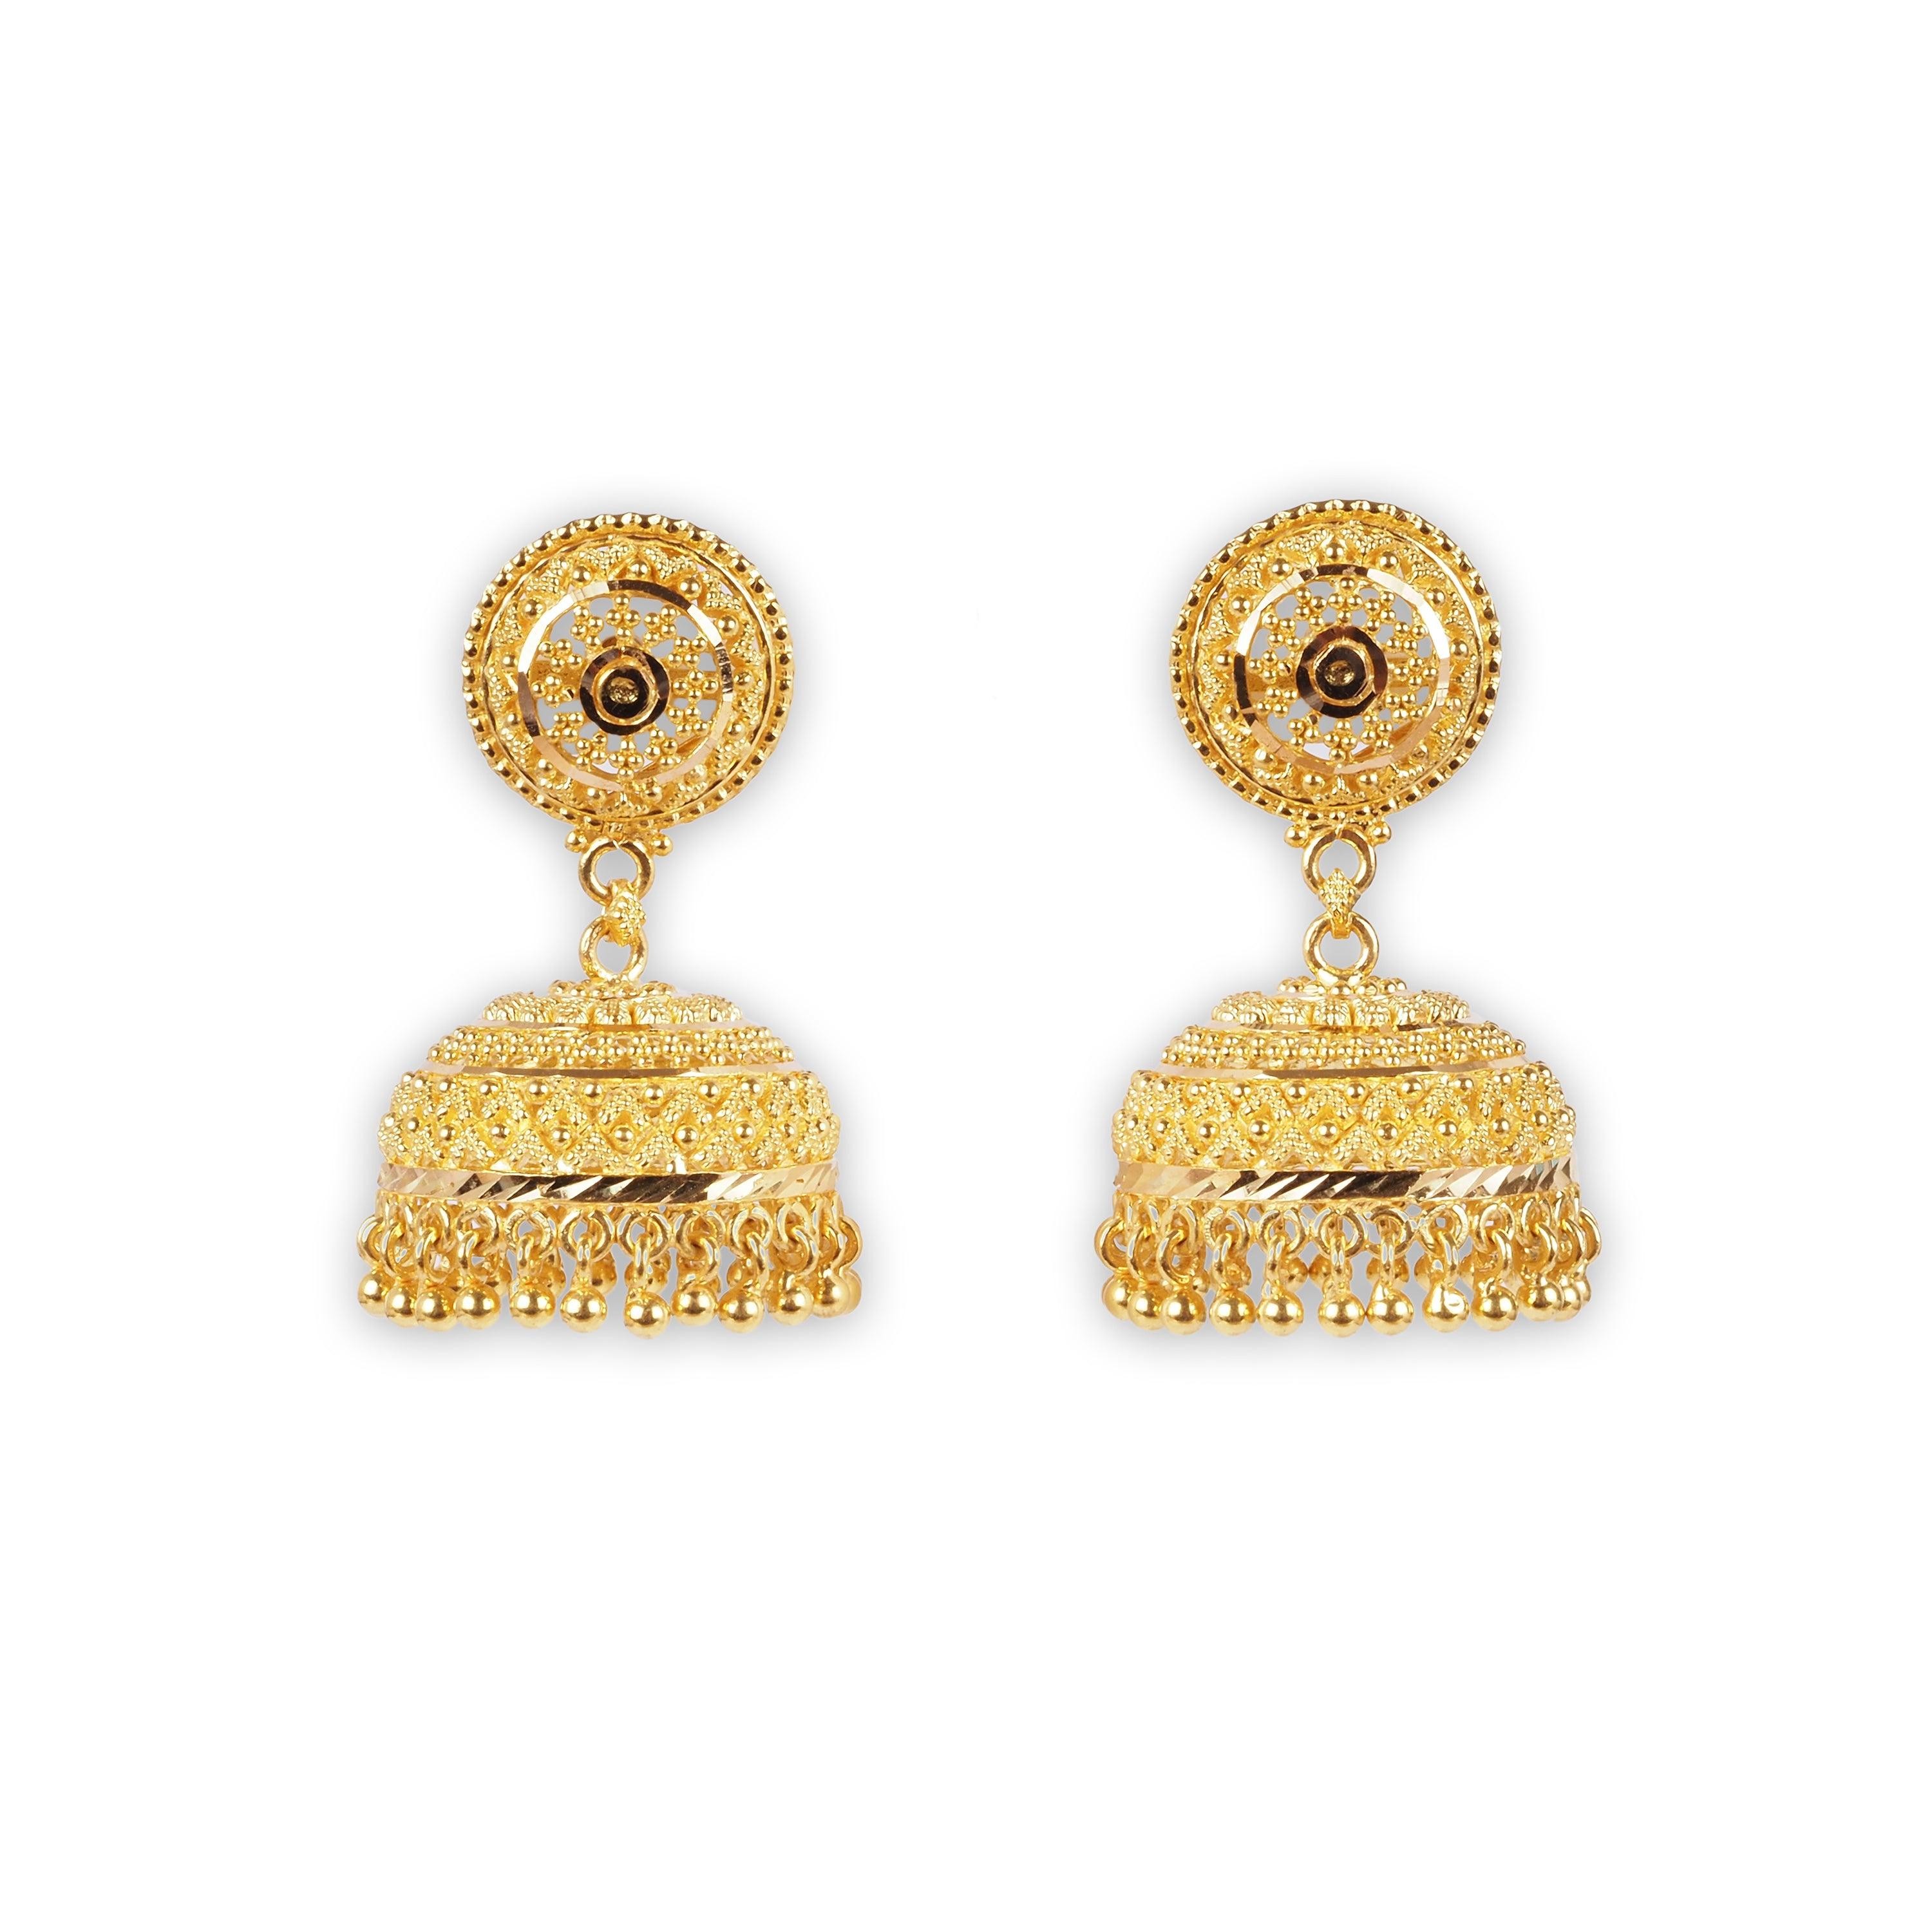 22ct Yellow Gold Jhoomka style Earrings with Filigree Work Design E-7931 - Minar Jewellers